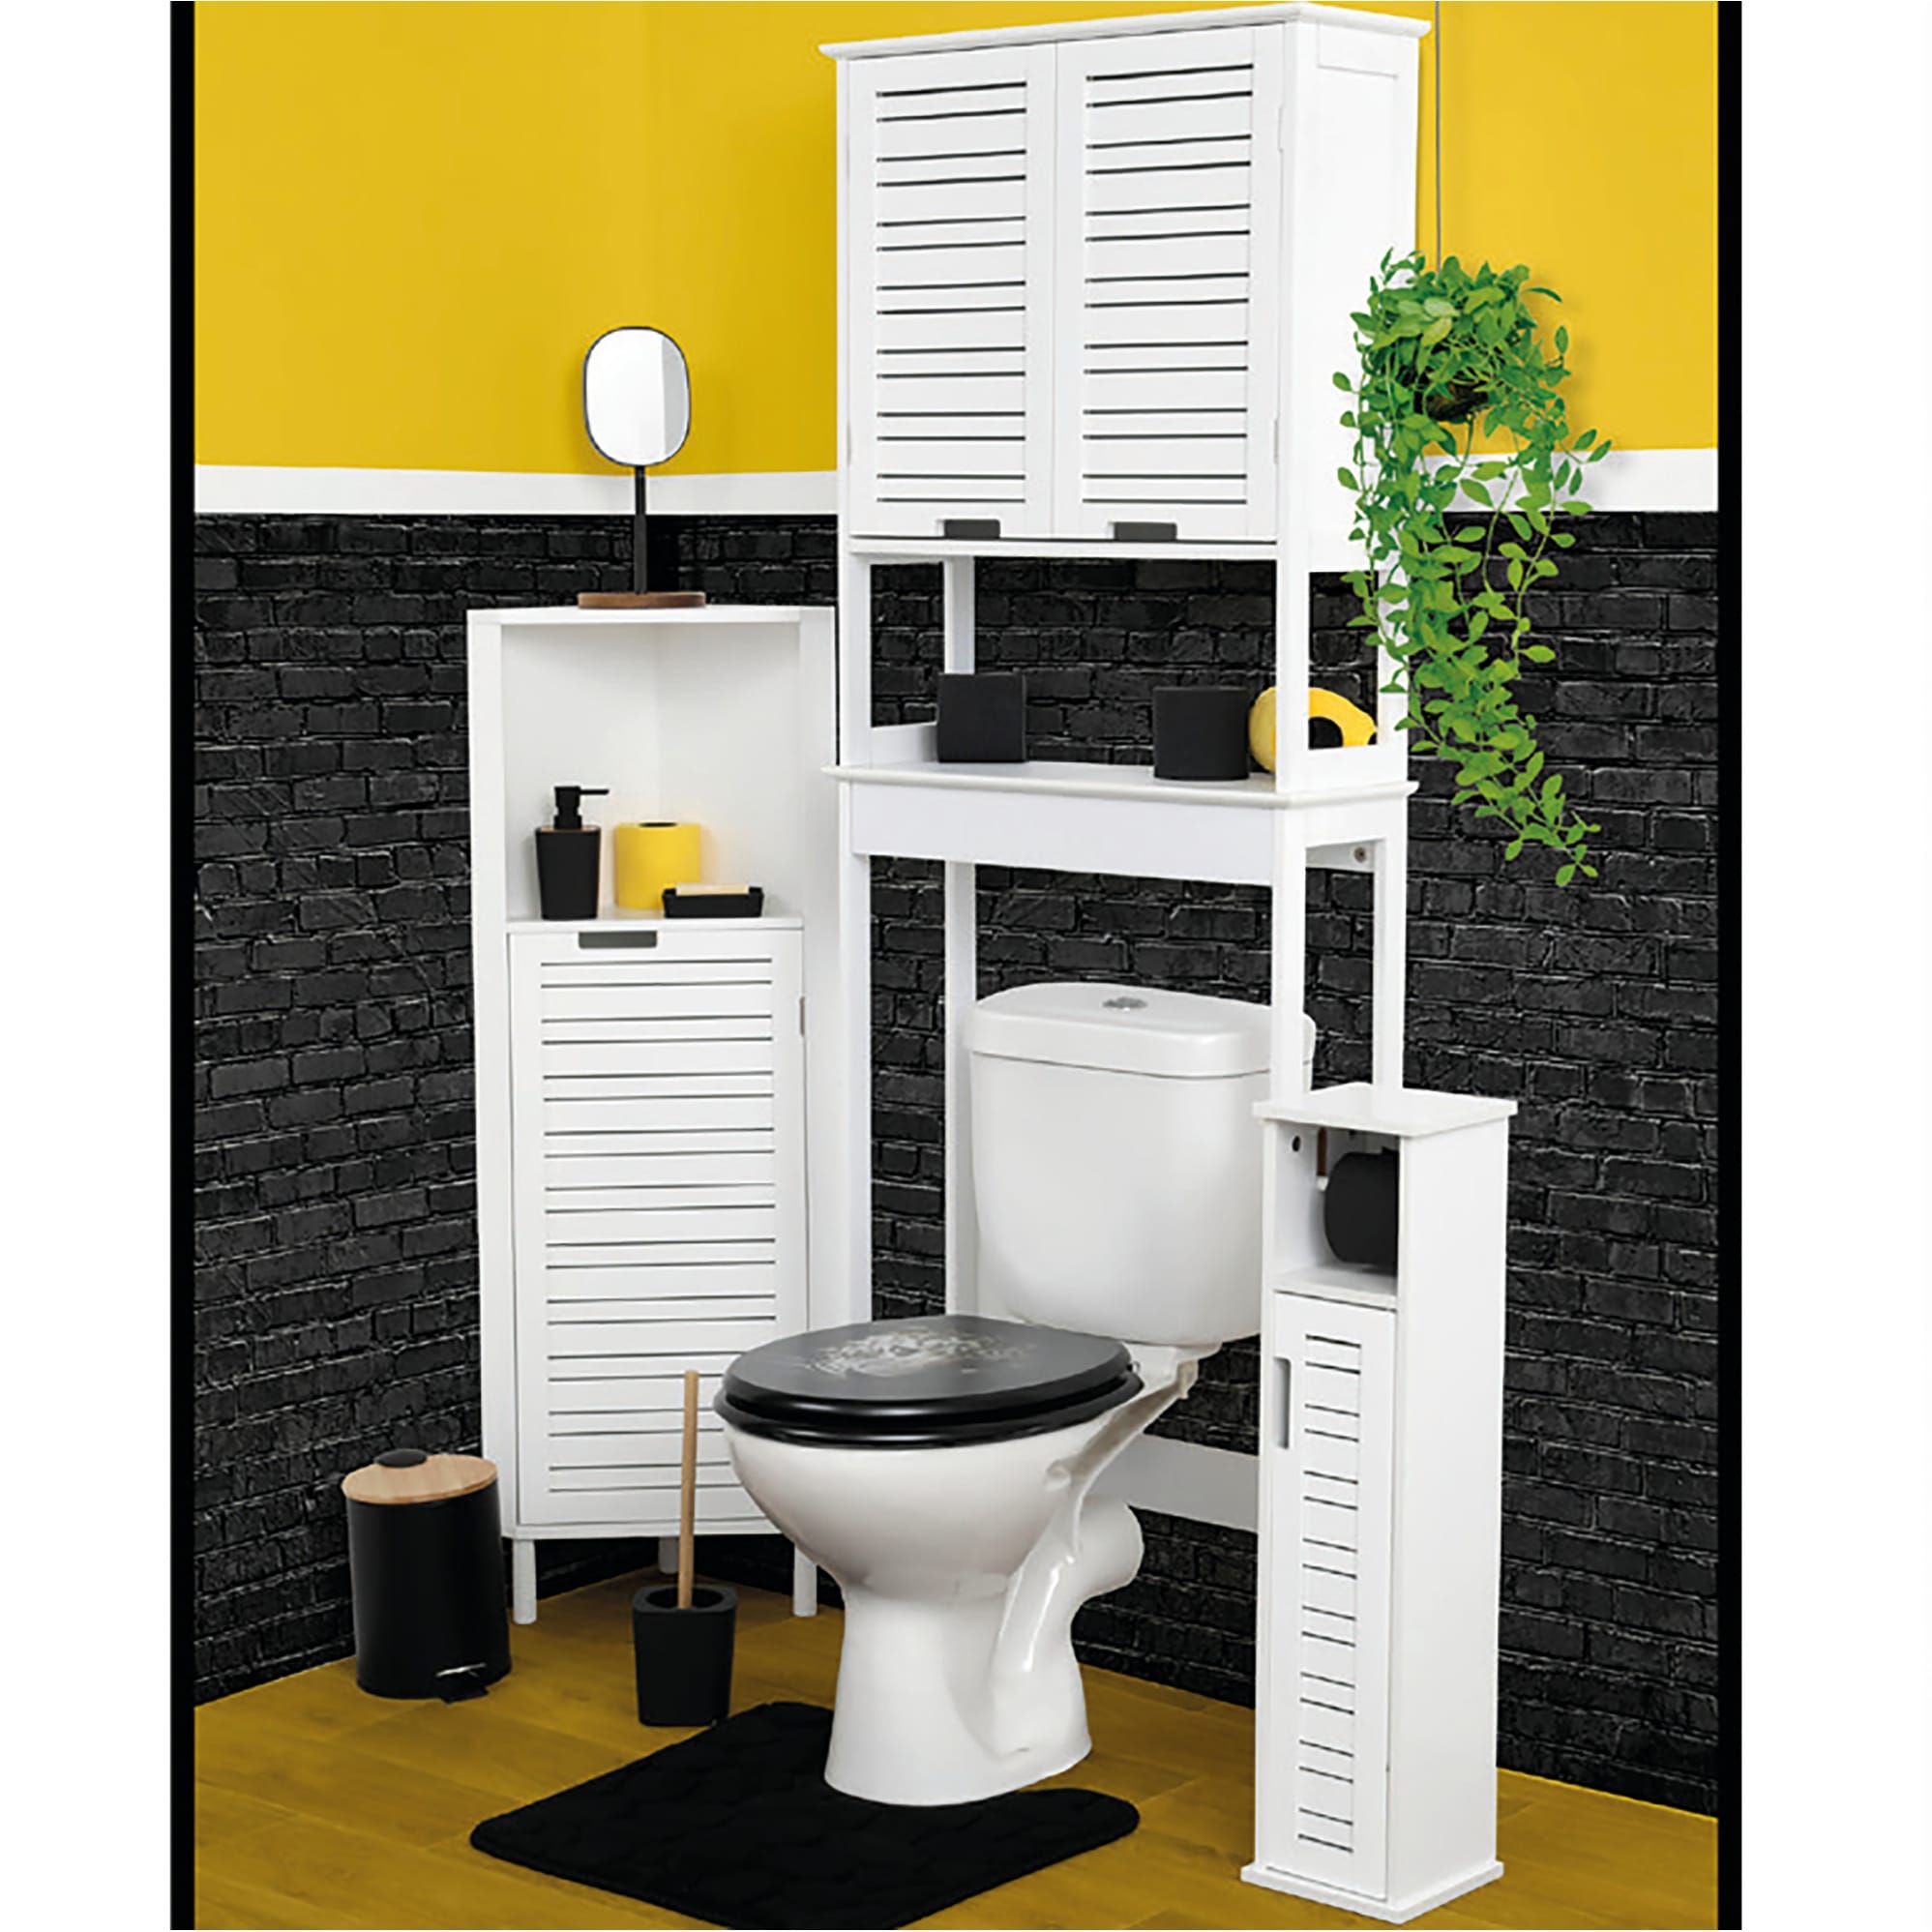 2 in 1 Toilet Paper Holder Stand Cabinet and Reserve - 7.2'L x 7.2W x  29.9H - On Sale - Bed Bath & Beyond - 21868354